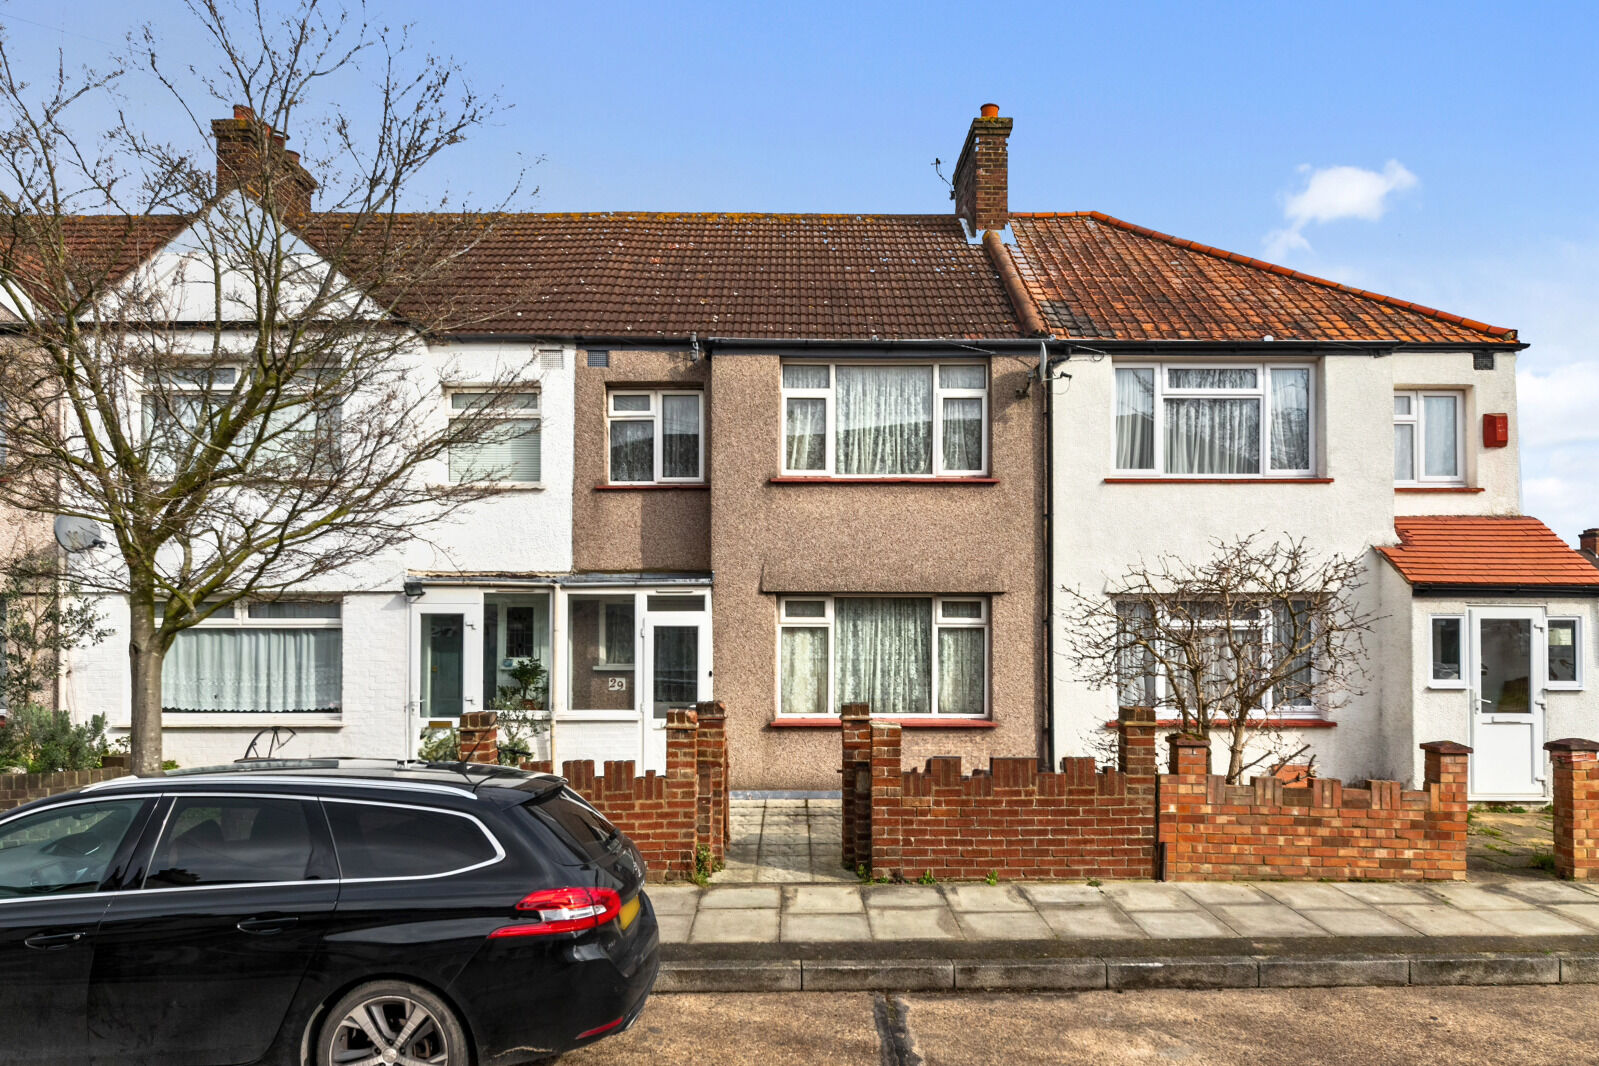 3 bedroom mid terraced house for sale Hadley Road, Mitcham, CR4, main image